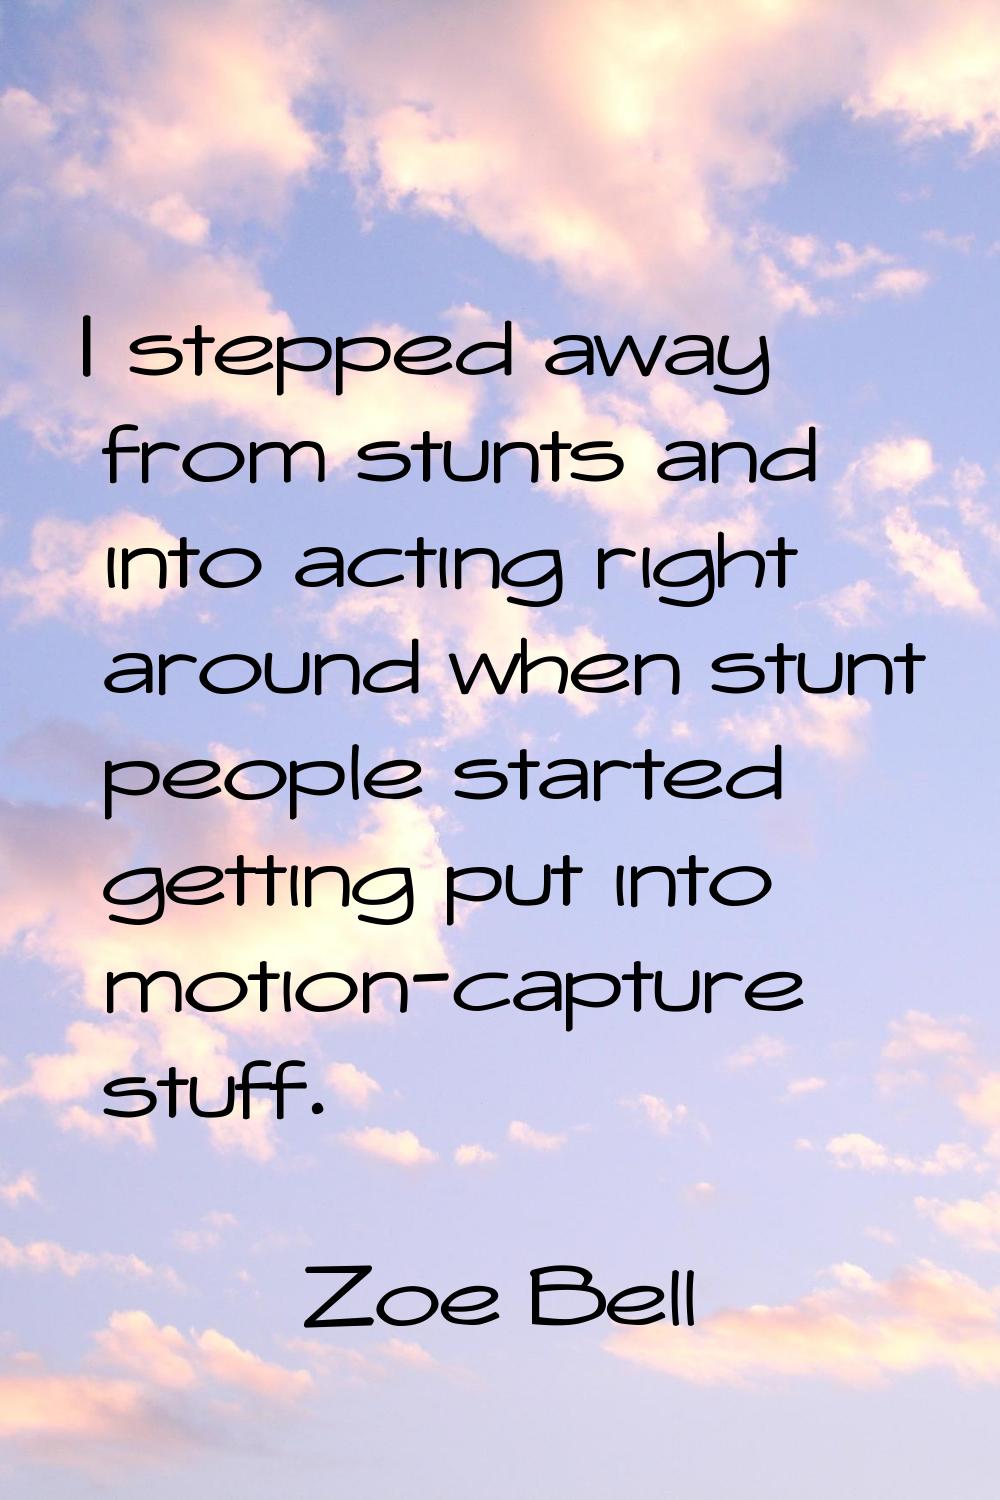 I stepped away from stunts and into acting right around when stunt people started getting put into 